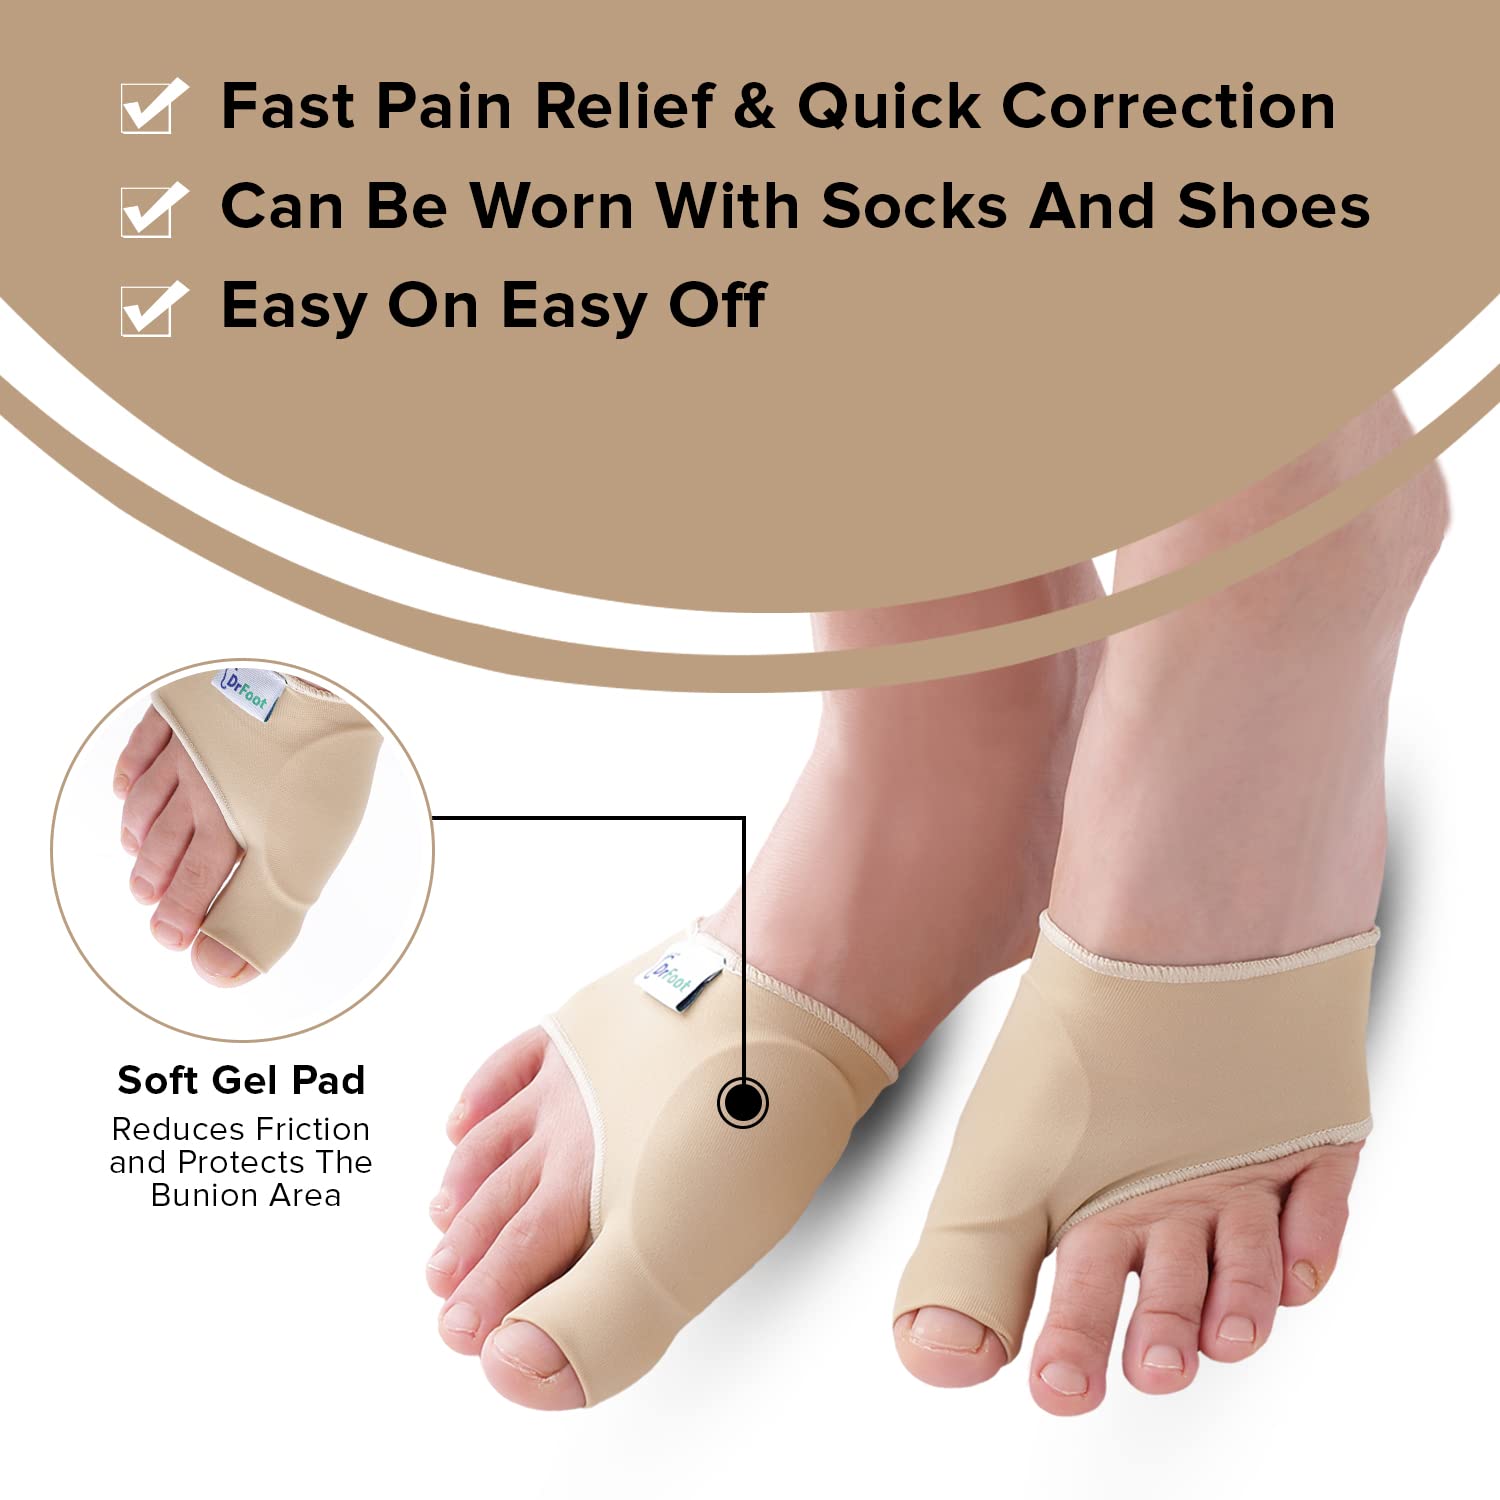 Dr Foot Bunion Corrector With Toe Separator | Effective For Toe Realignment | Relief Gel Pad Toe Brace Cushion | For Men & Women - Beige Color (Size – S) (Pack of 5)